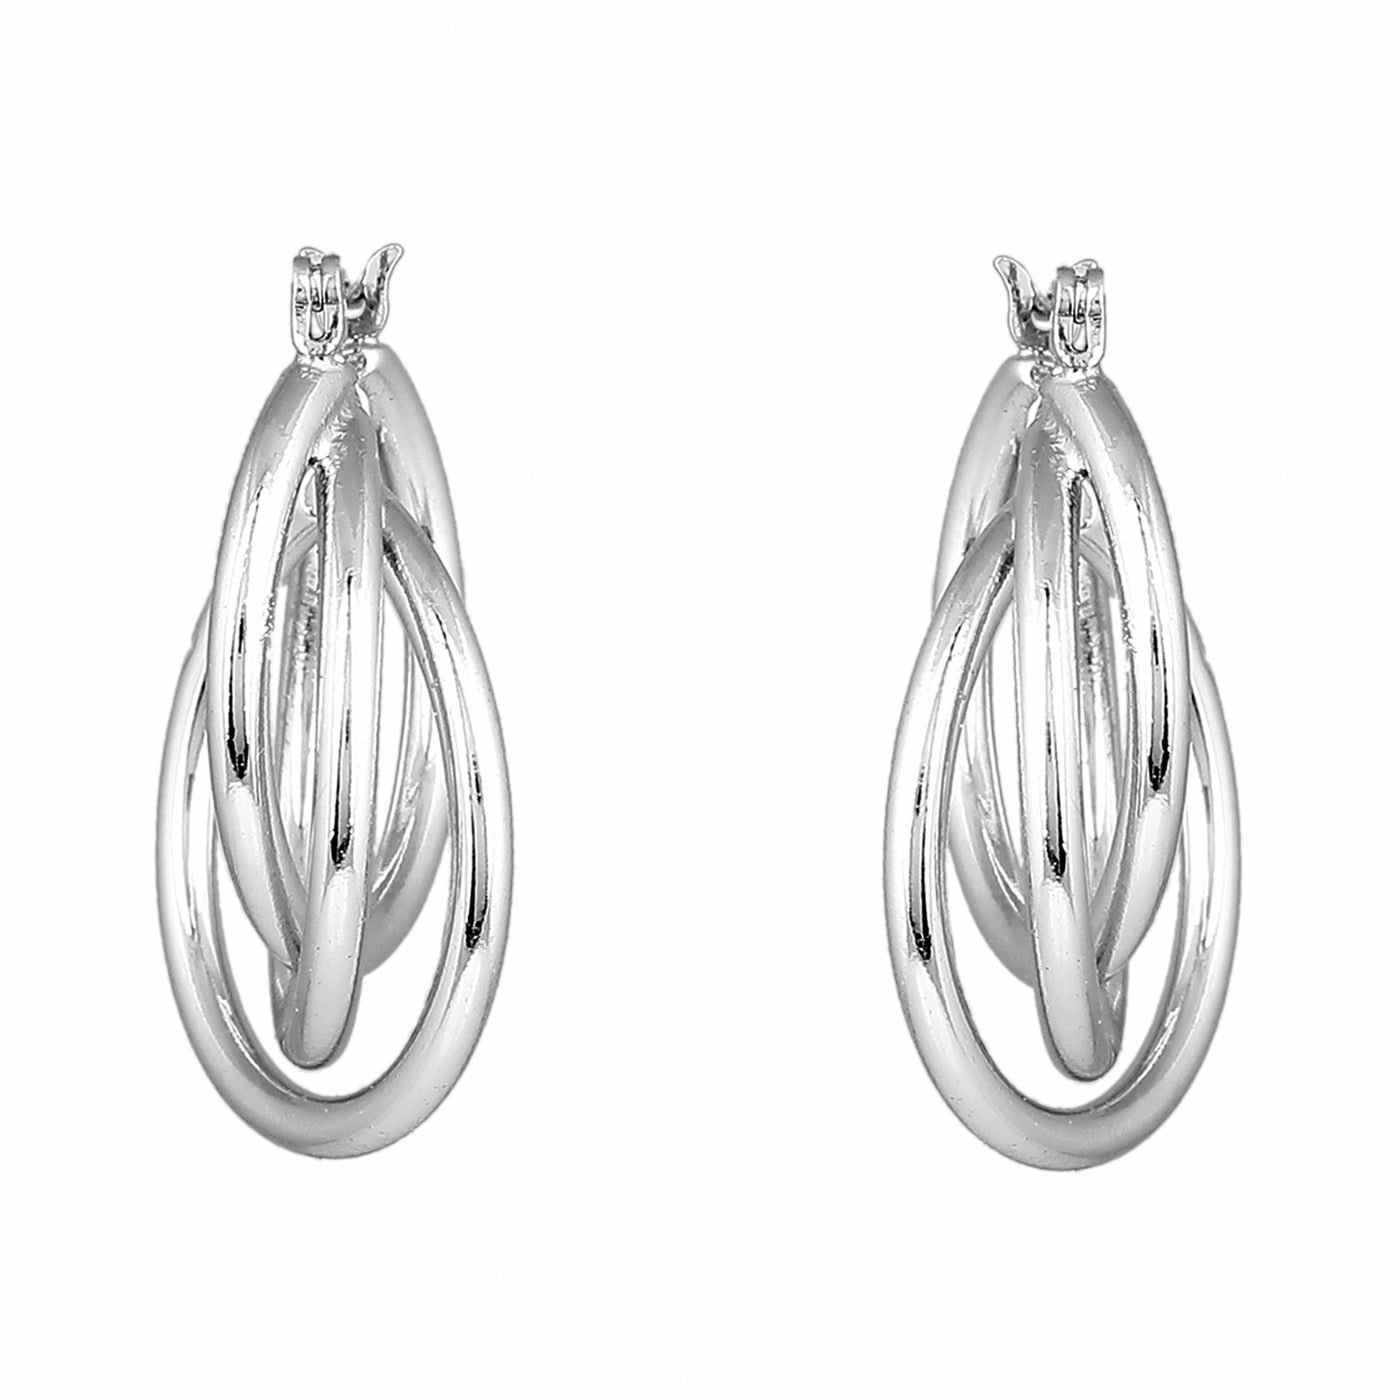 Estele Fashion Earrings for Women and Girls Rhodium Plated Twisted Layered Trio Circular Metallic Hoop Earrings Party/Office Wear for Girls and Women